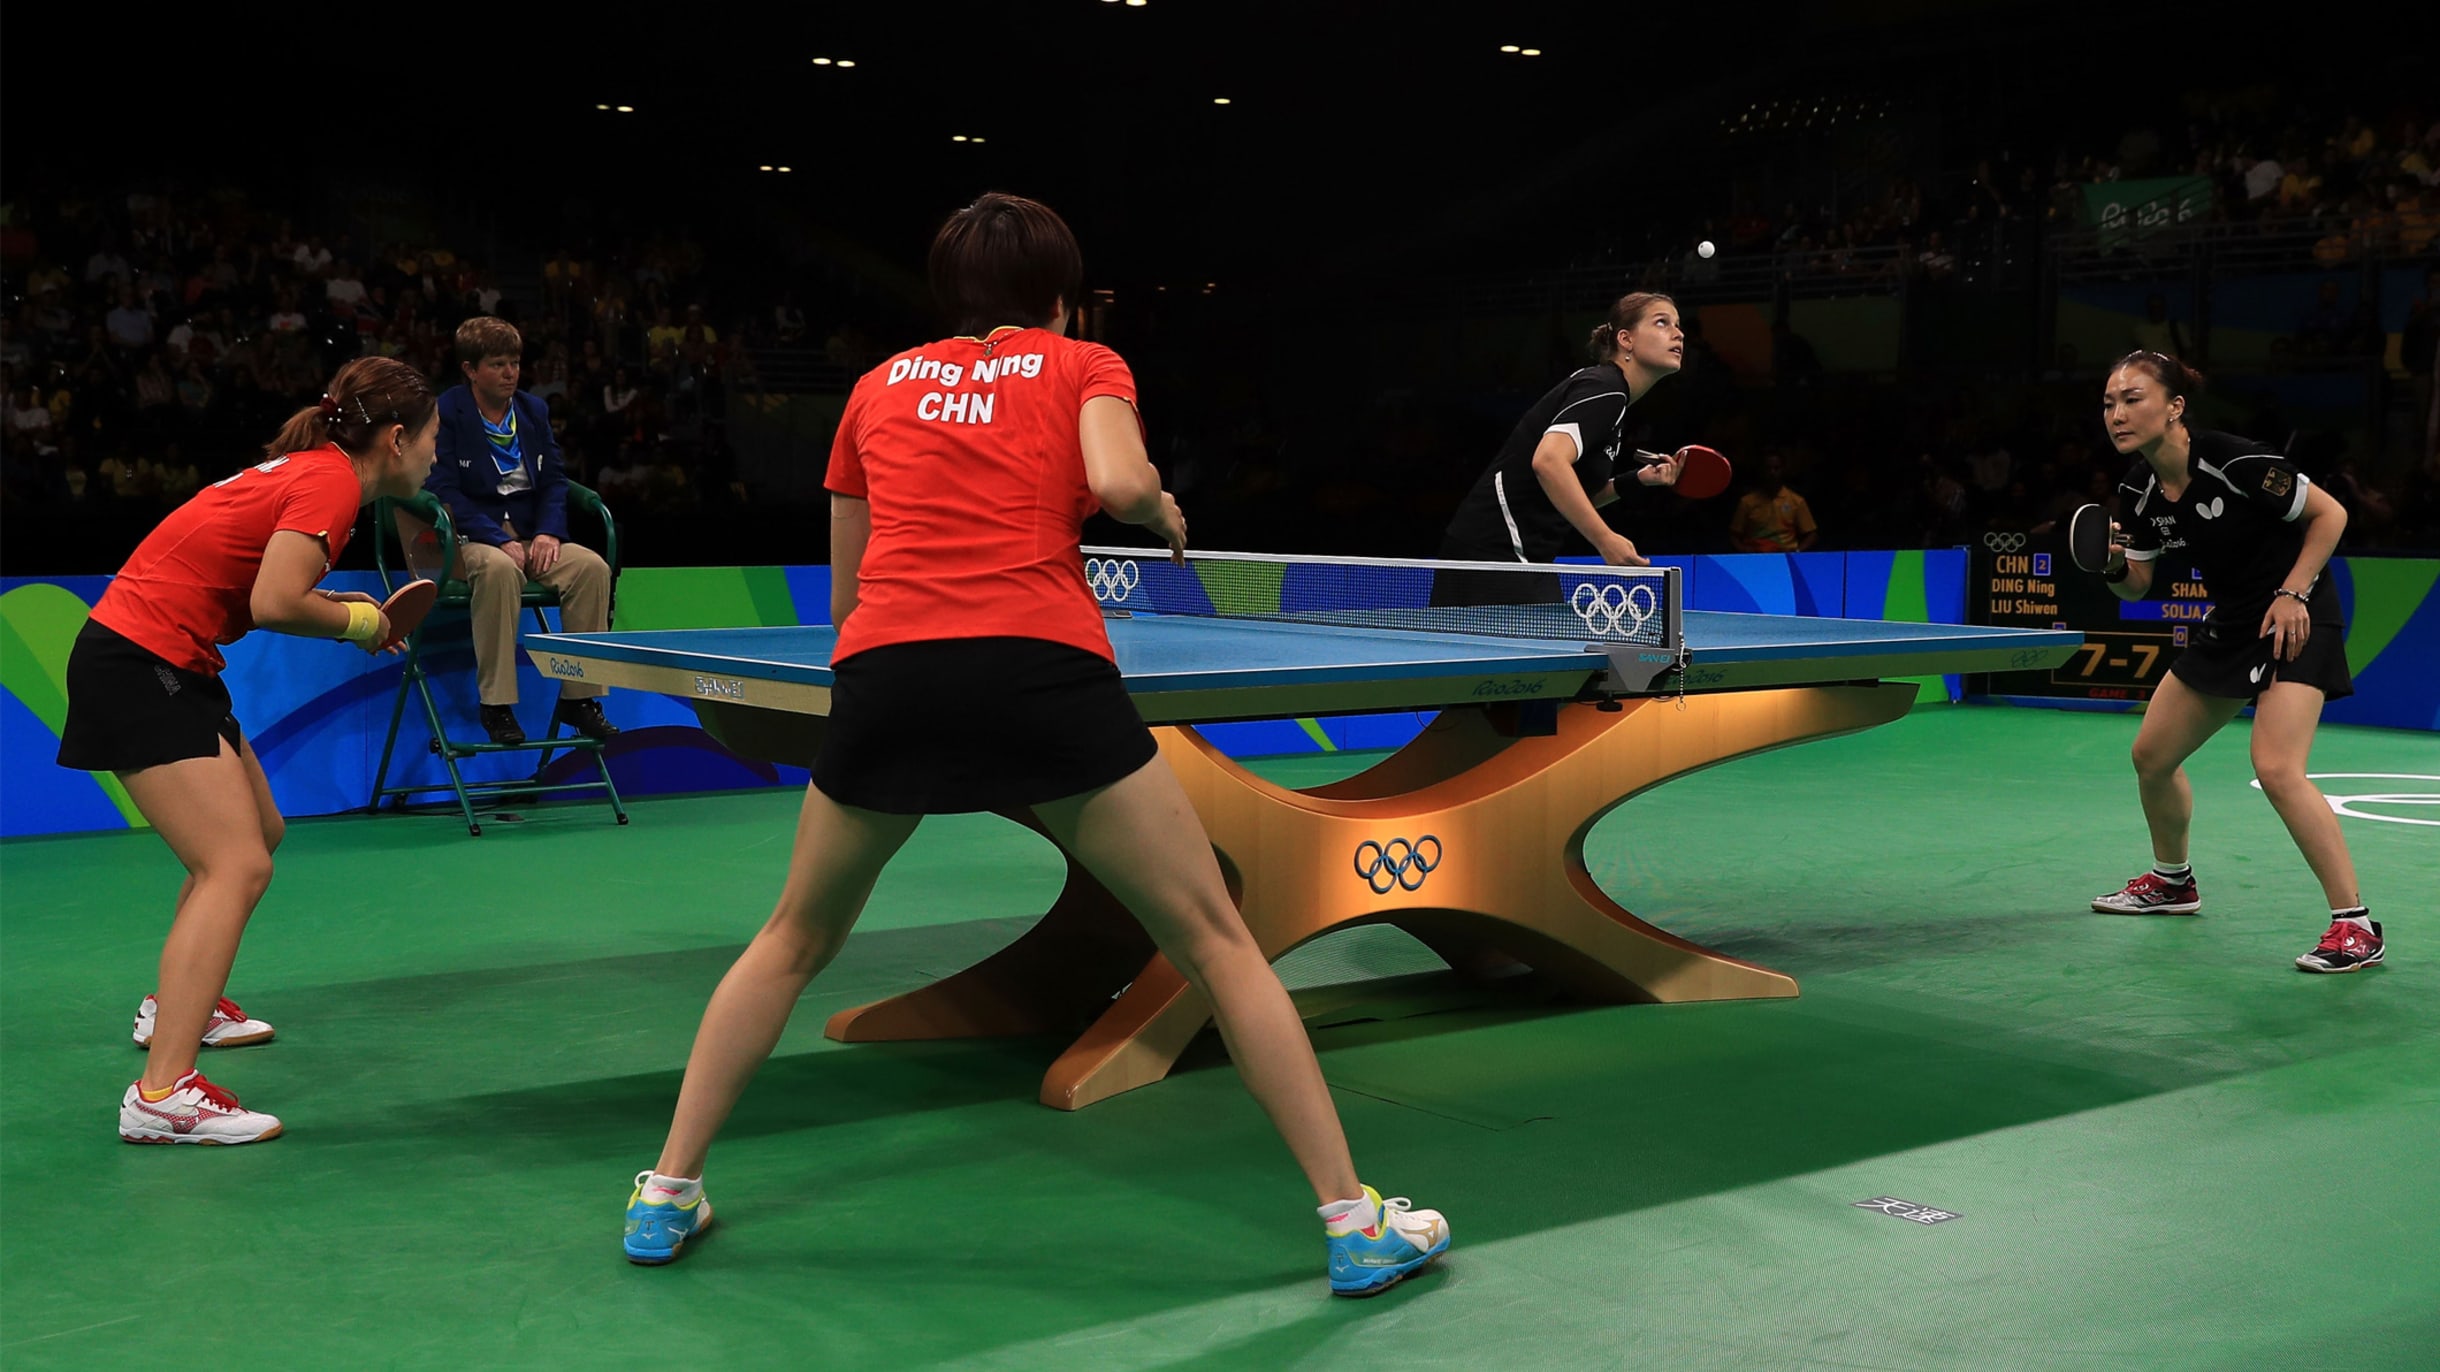 China women beat Germany to claim table tennis gold